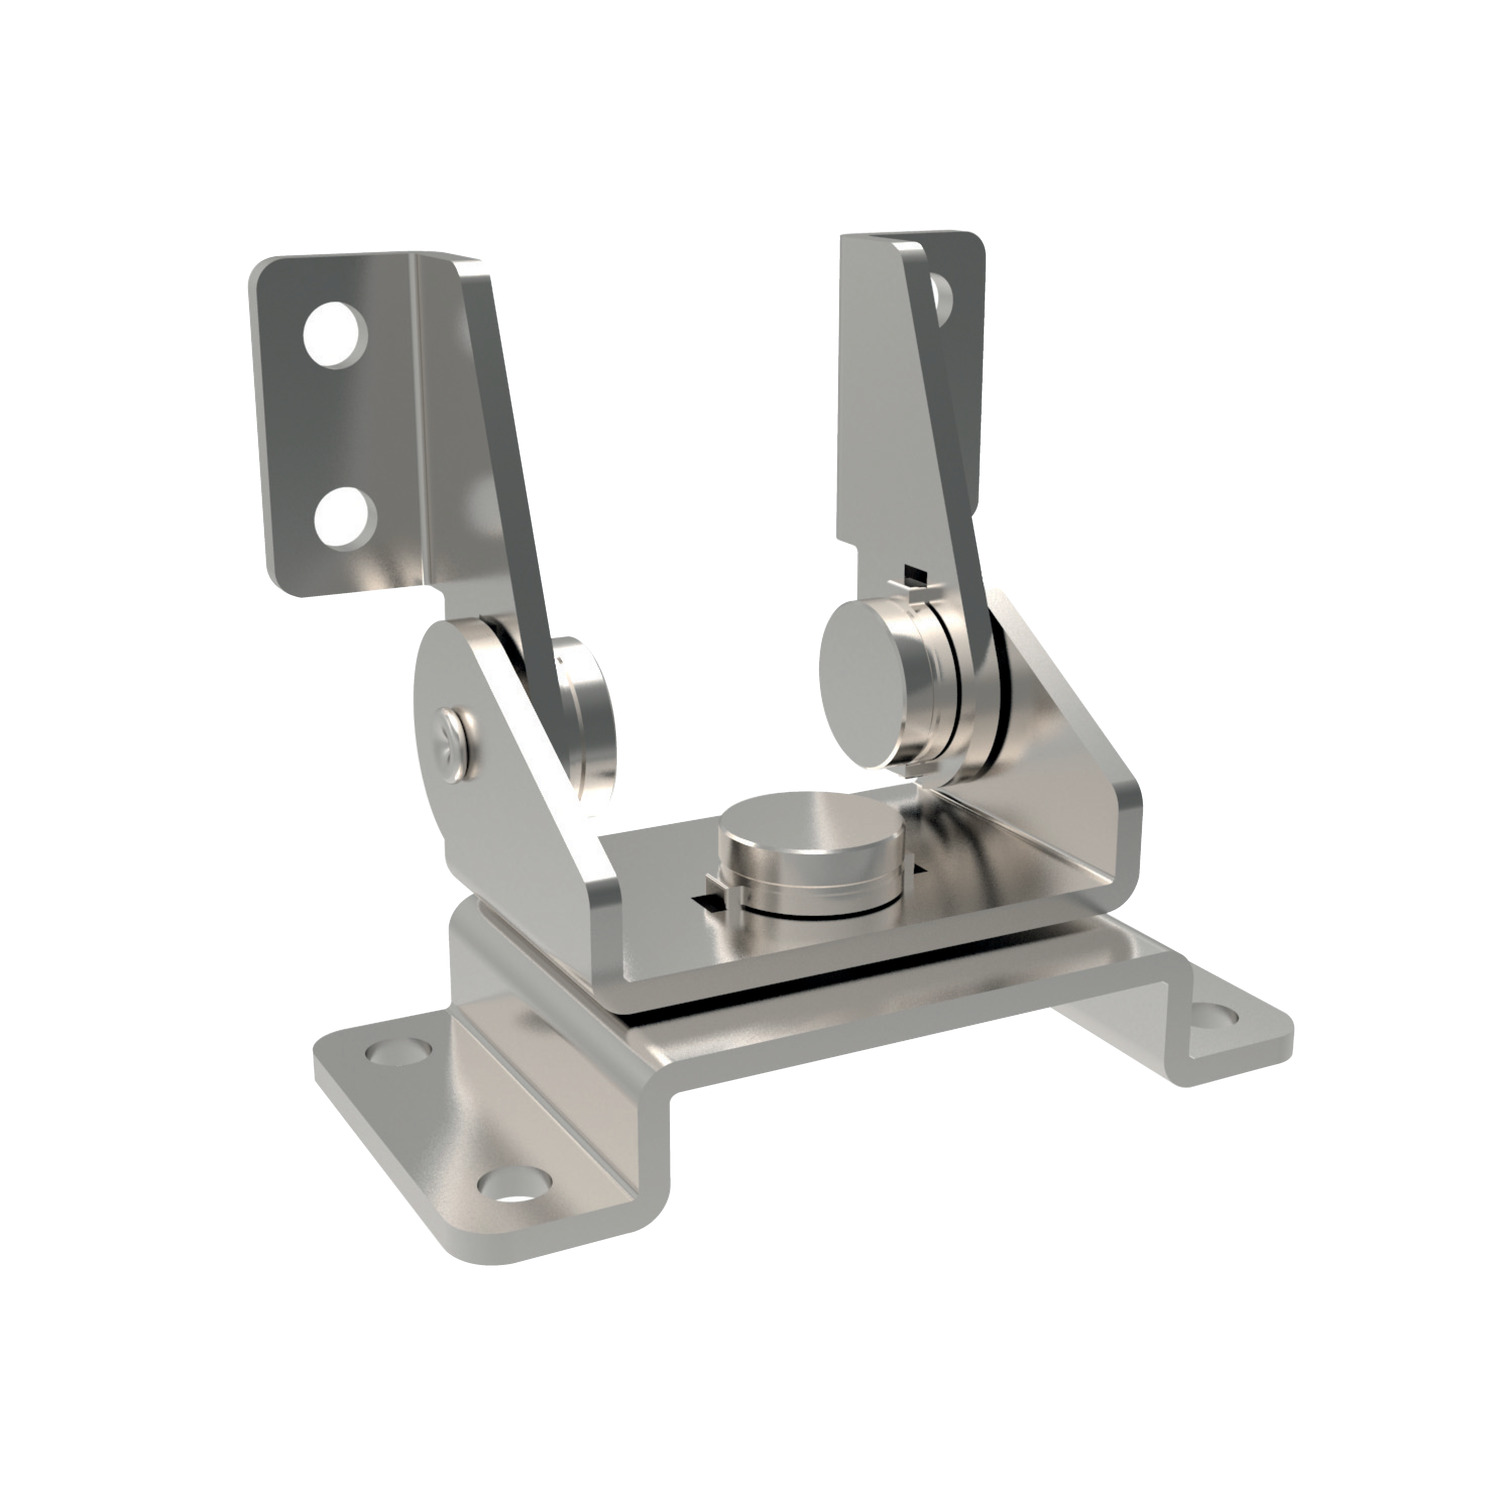 S4030.AC0030 Constant Torque-Dual Axis Friction Hinge Screw mount - Stainless steel - 30 Tilting Torque kgf/cm +/-20%